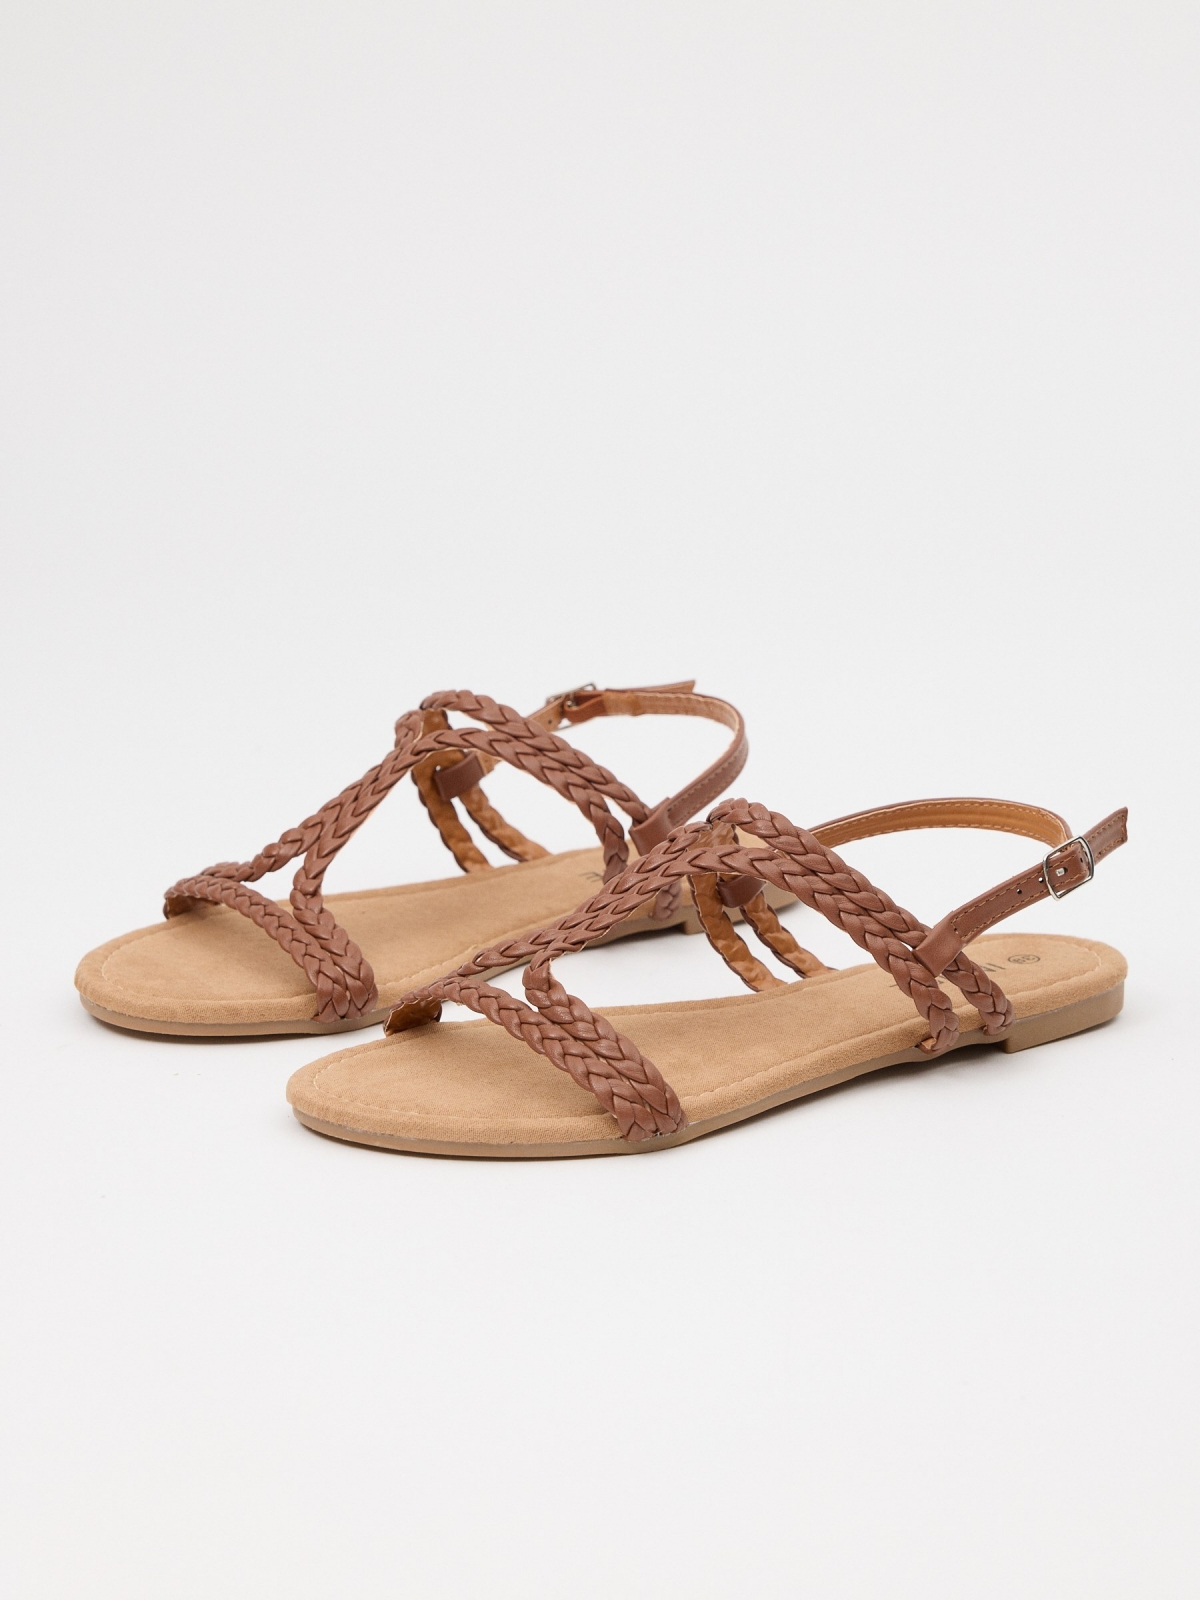 Sandals with crossed braided straps earth brown 45º front view